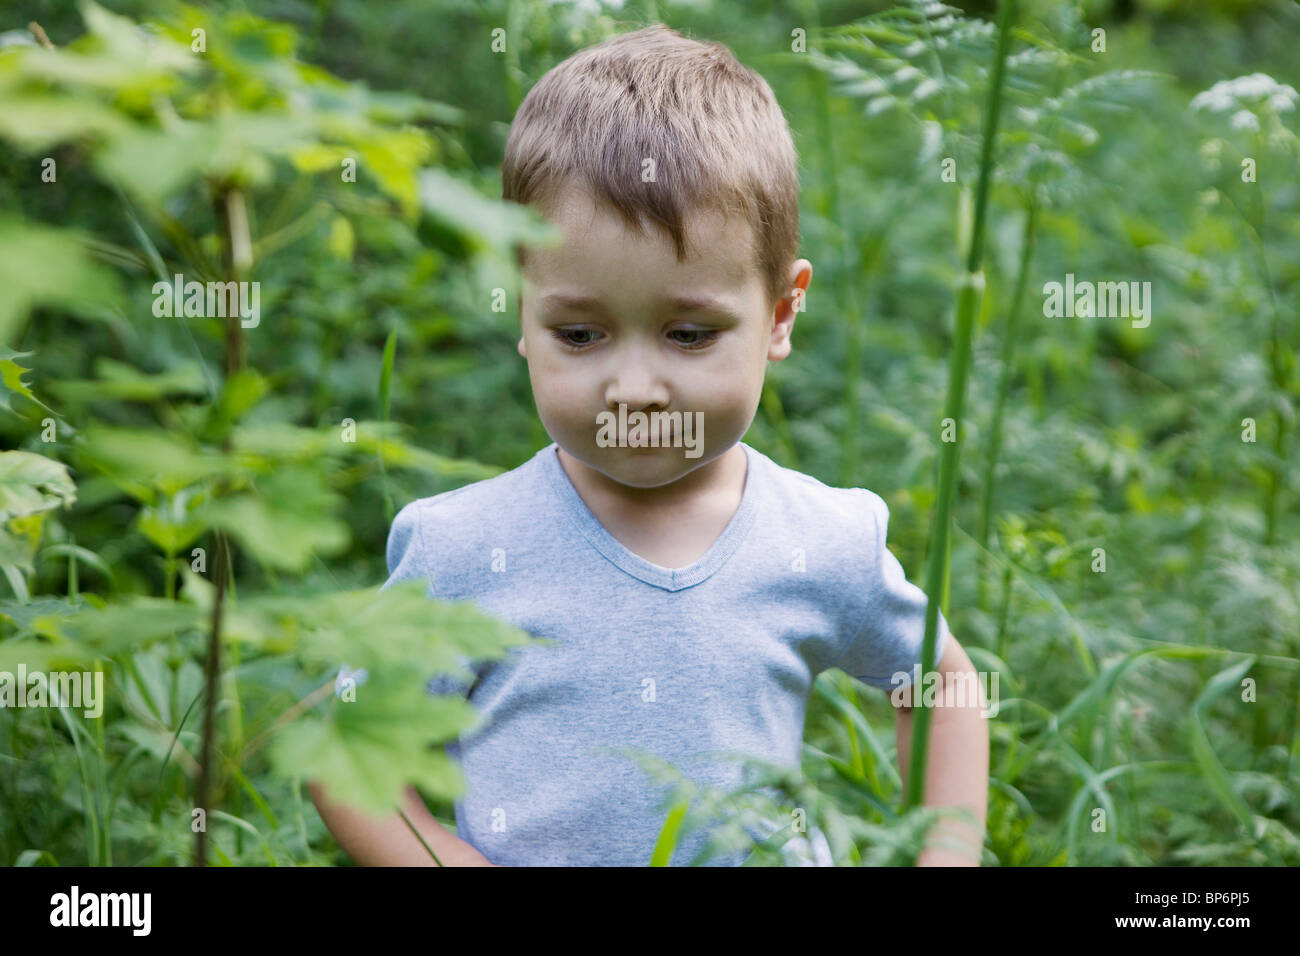 Portrait of a young boy, outdoors Stock Photo